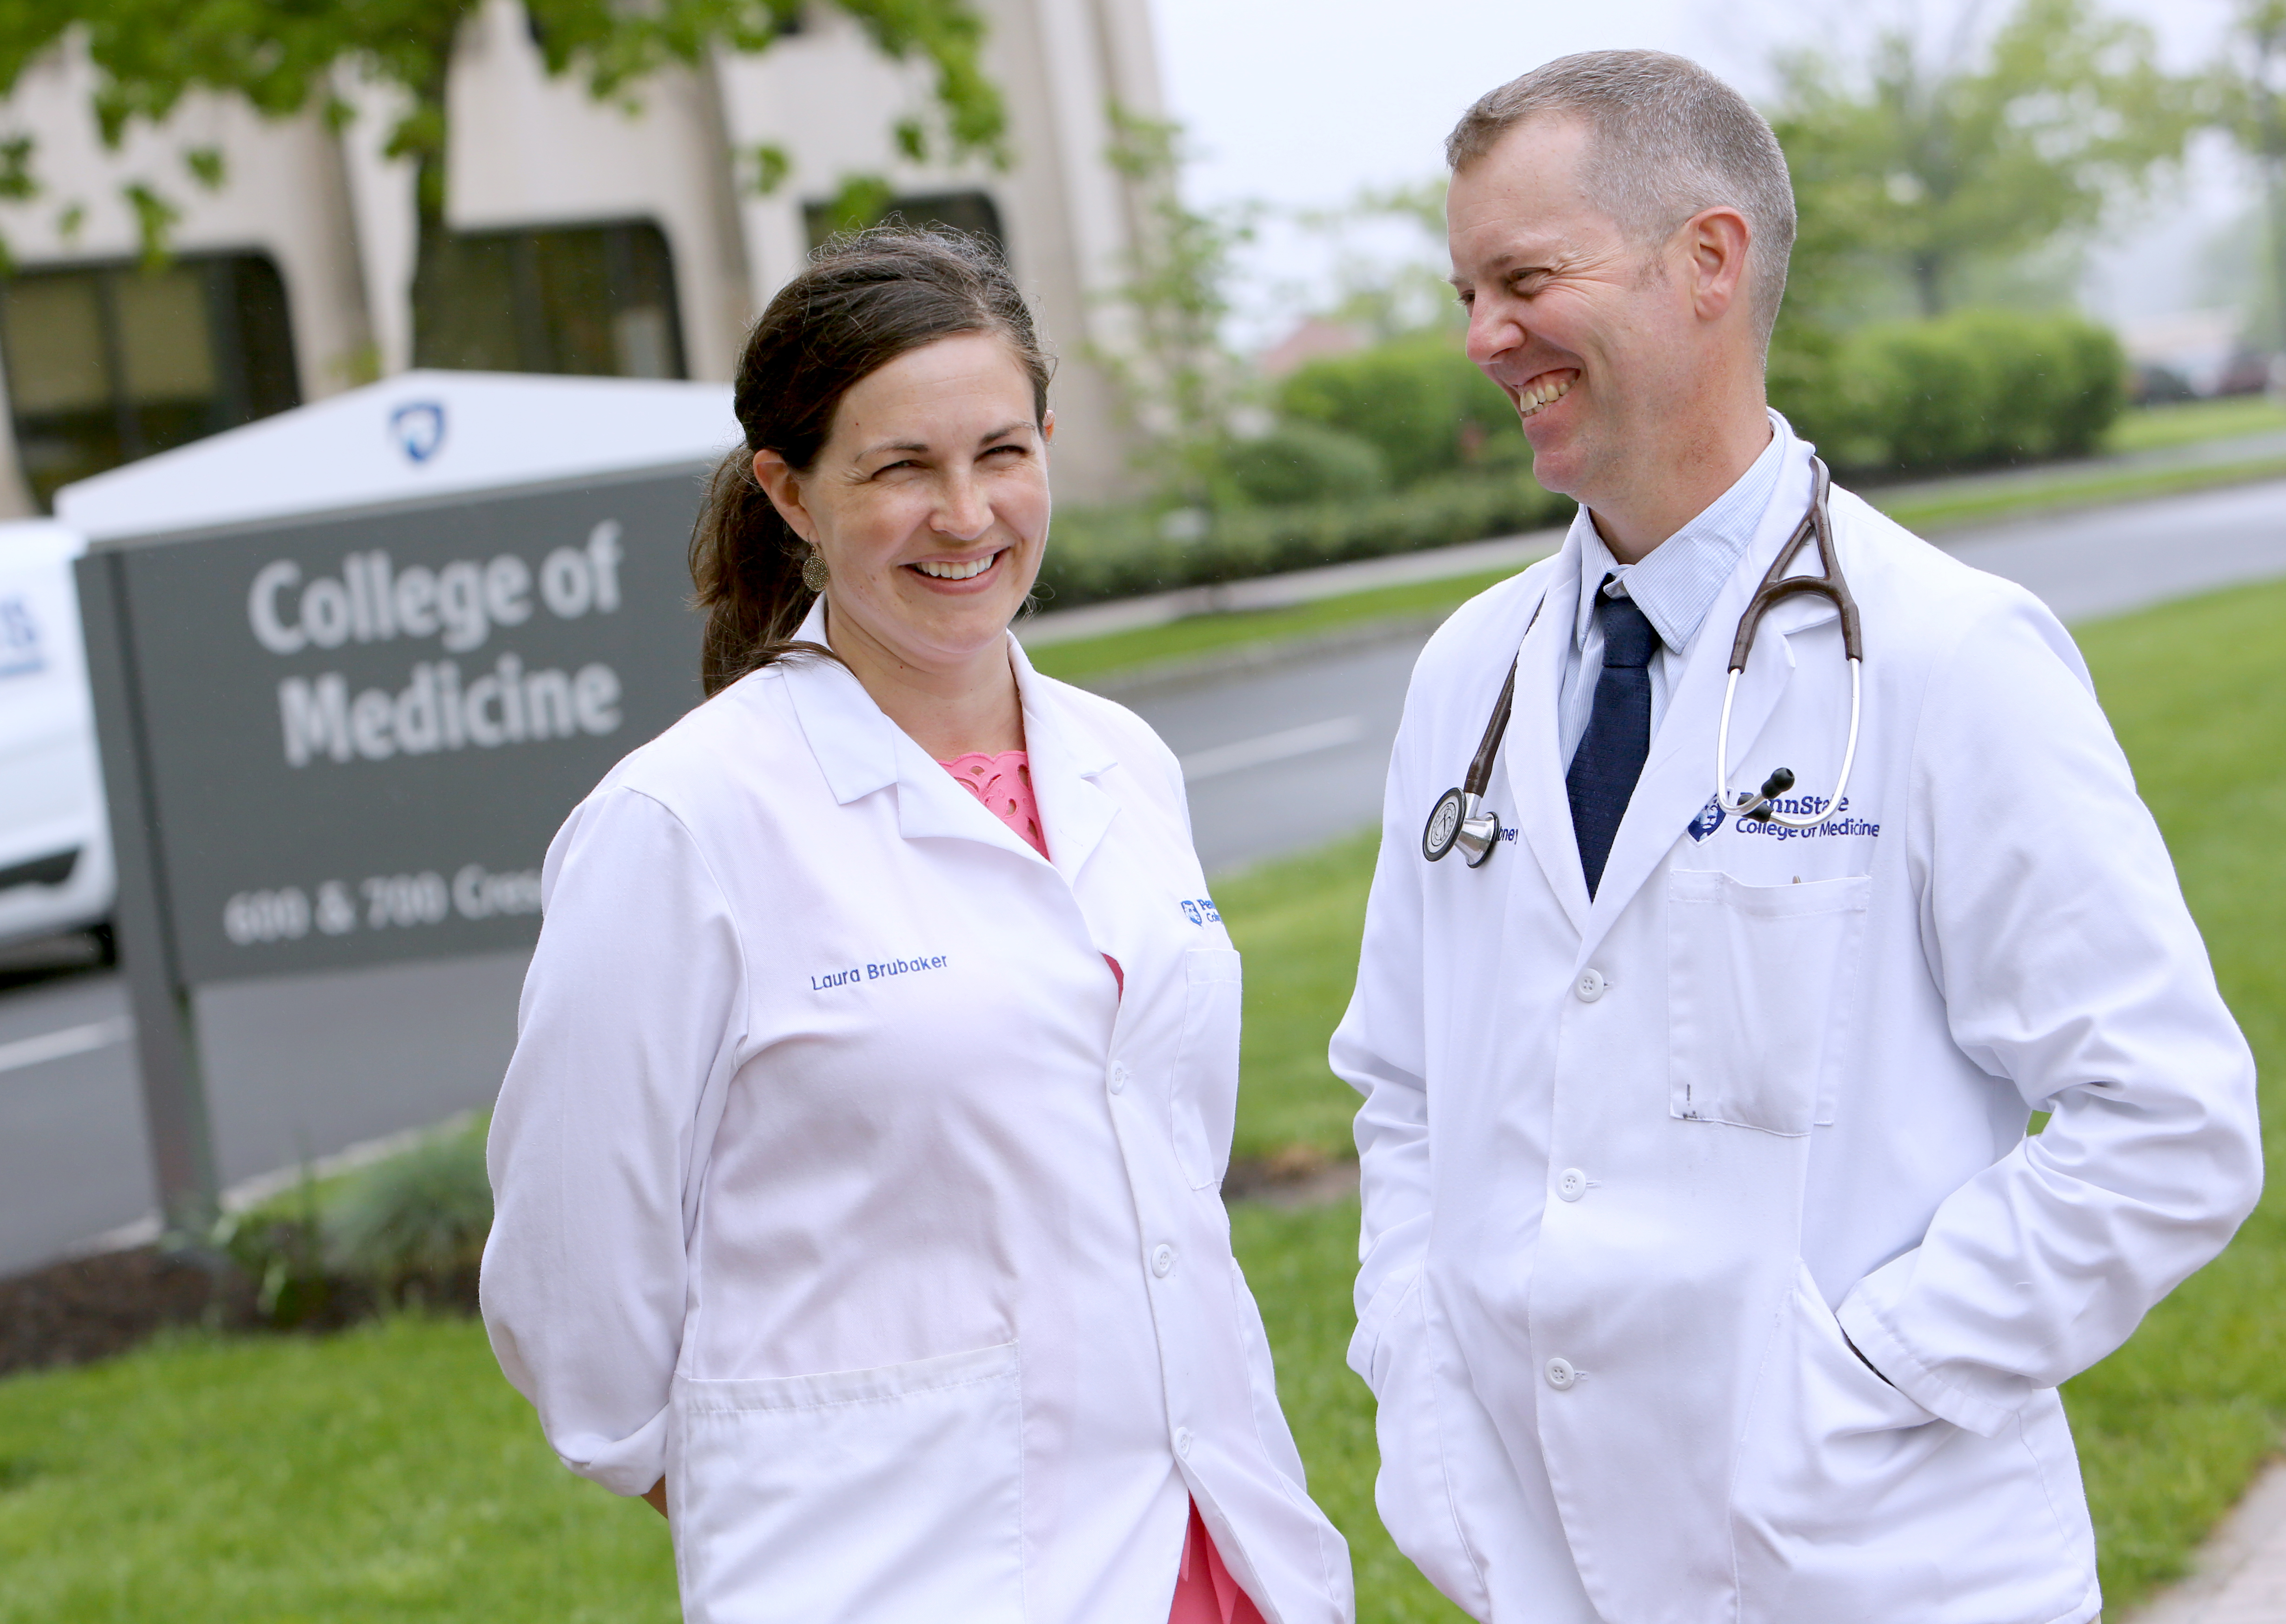 Dr. Laura Brubaker, left, and Dr. Benjamin Abney smile in front of the Penn State College of Medicine sign. They are wearing physician lab coats with their names and the College of Medicine logo on them. Dr. Abney has a stethoscope around his neck. Behind them is a road and the College of Medicine building.